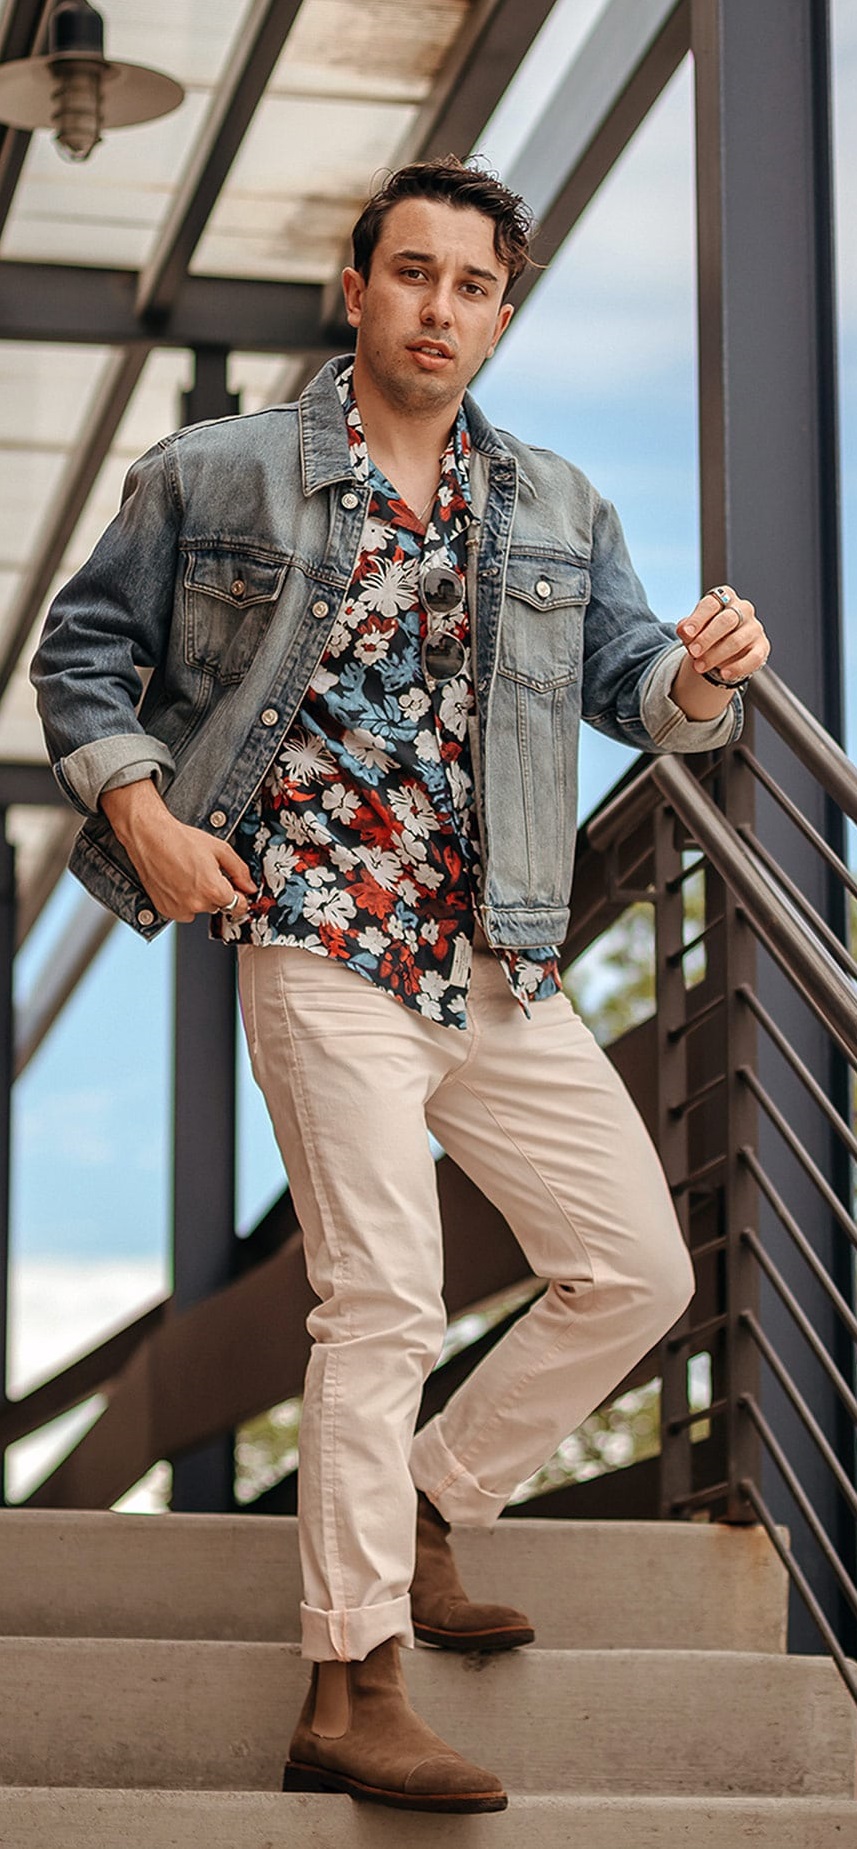 Denim jacket over a printed shirt and beige pant - Printed Shirt Combinationss for Men